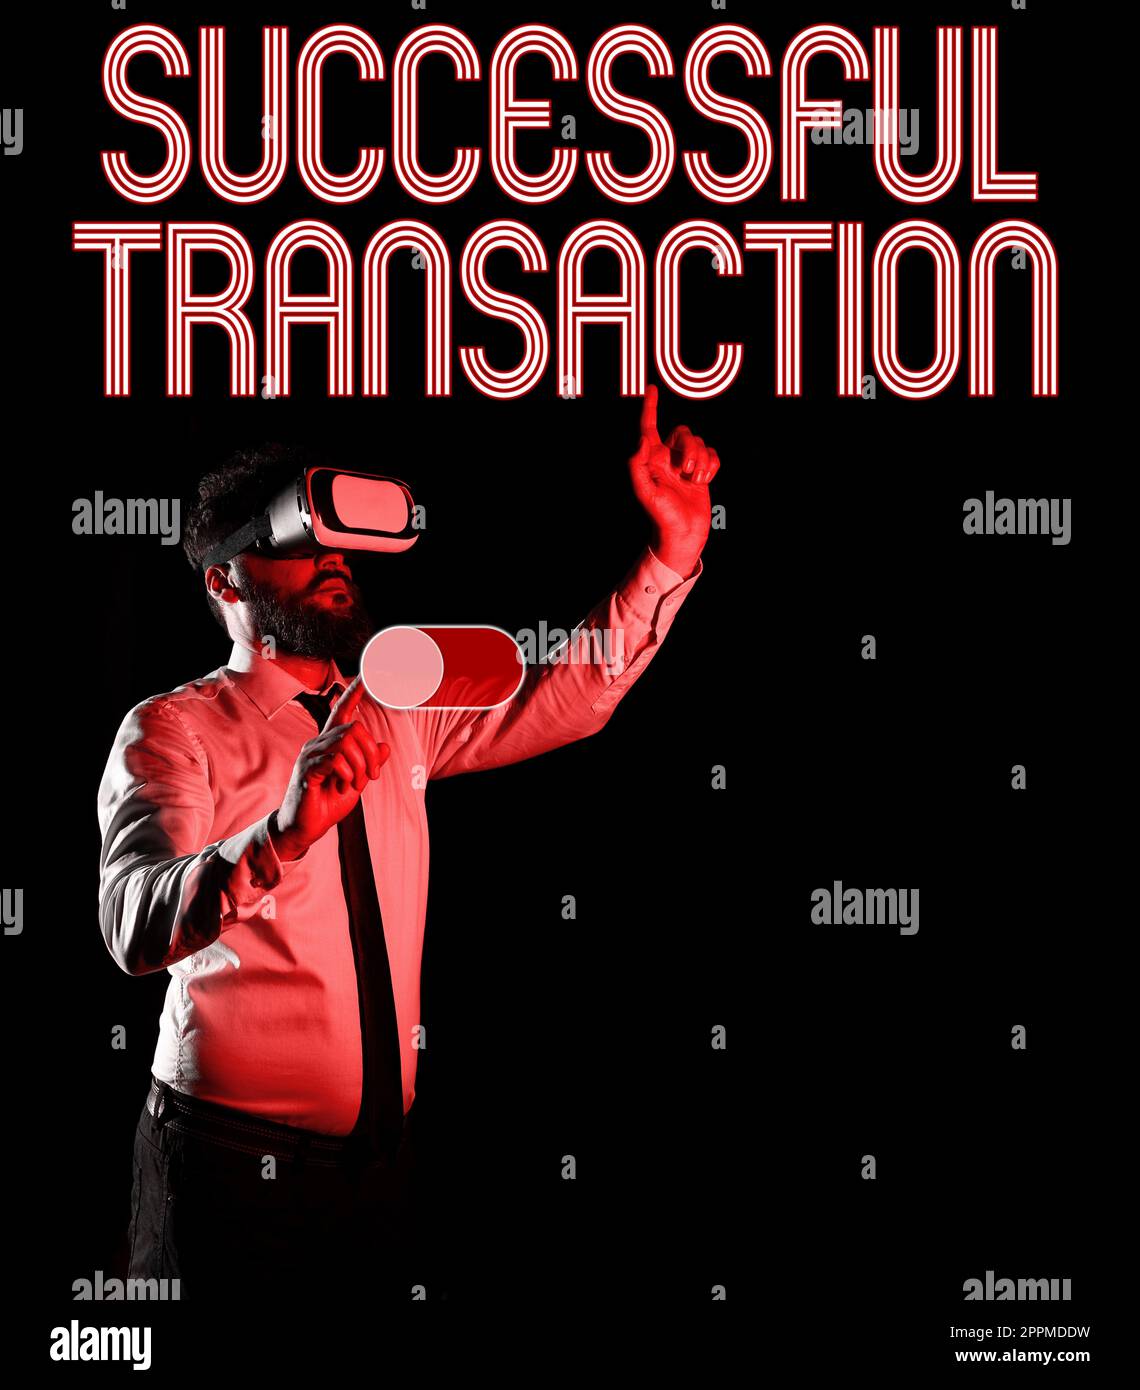 Inspiration showing sign Successful Transaction. Business showcase generate high response rate allow more efficient analysis Stock Photo